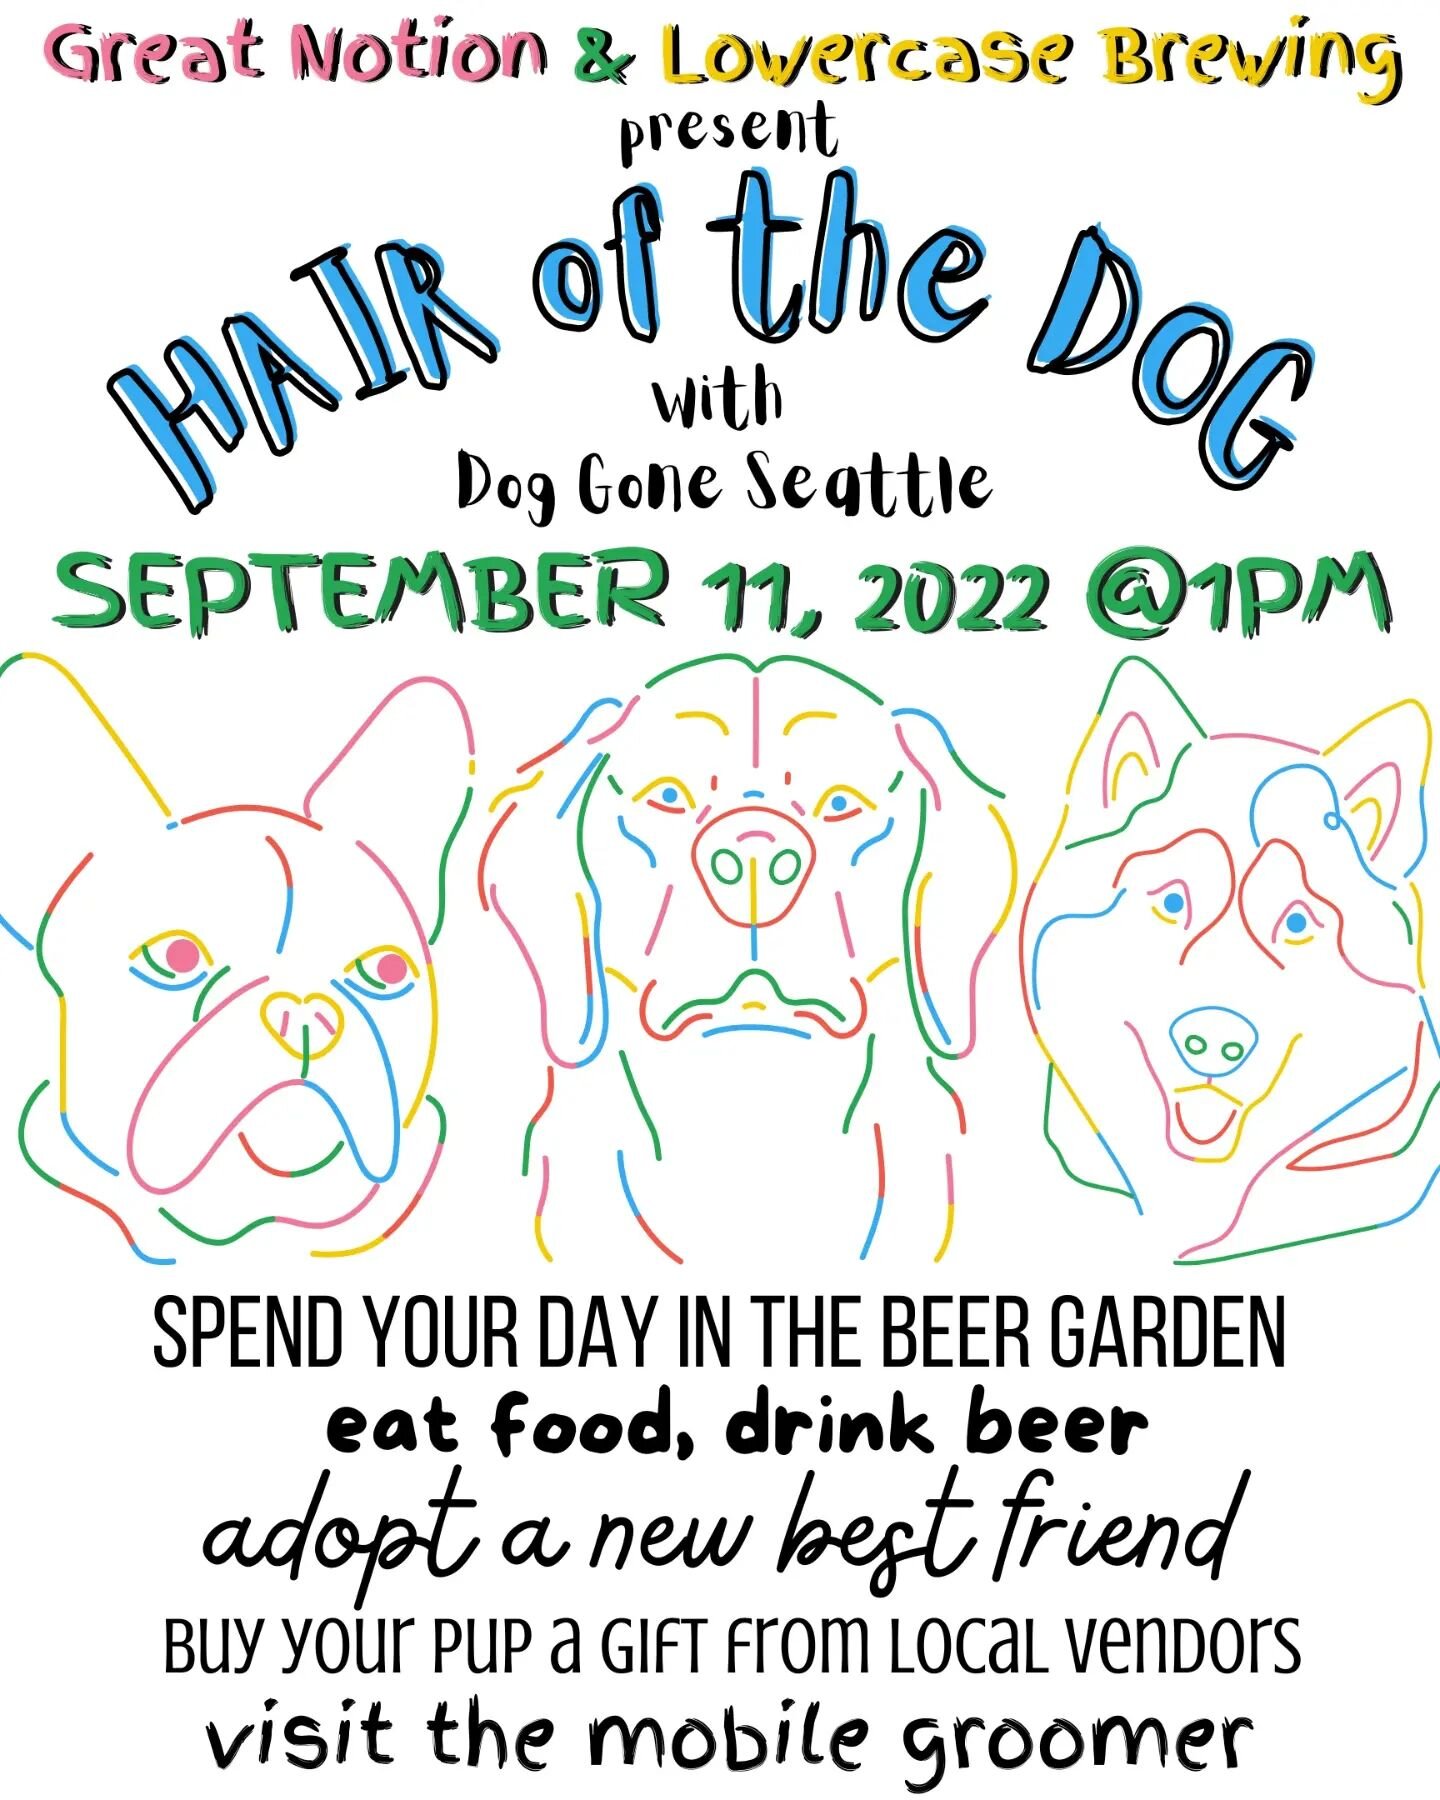 Are you one of those pet owners who likes to spoil your dog with toys, a fresh grooming or even a cartoon drawing of themselves? Well this is the event for you! Join us&nbsp;Sunday, September 11th at 1pm&nbsp;when we'll be partnering with Great Notio